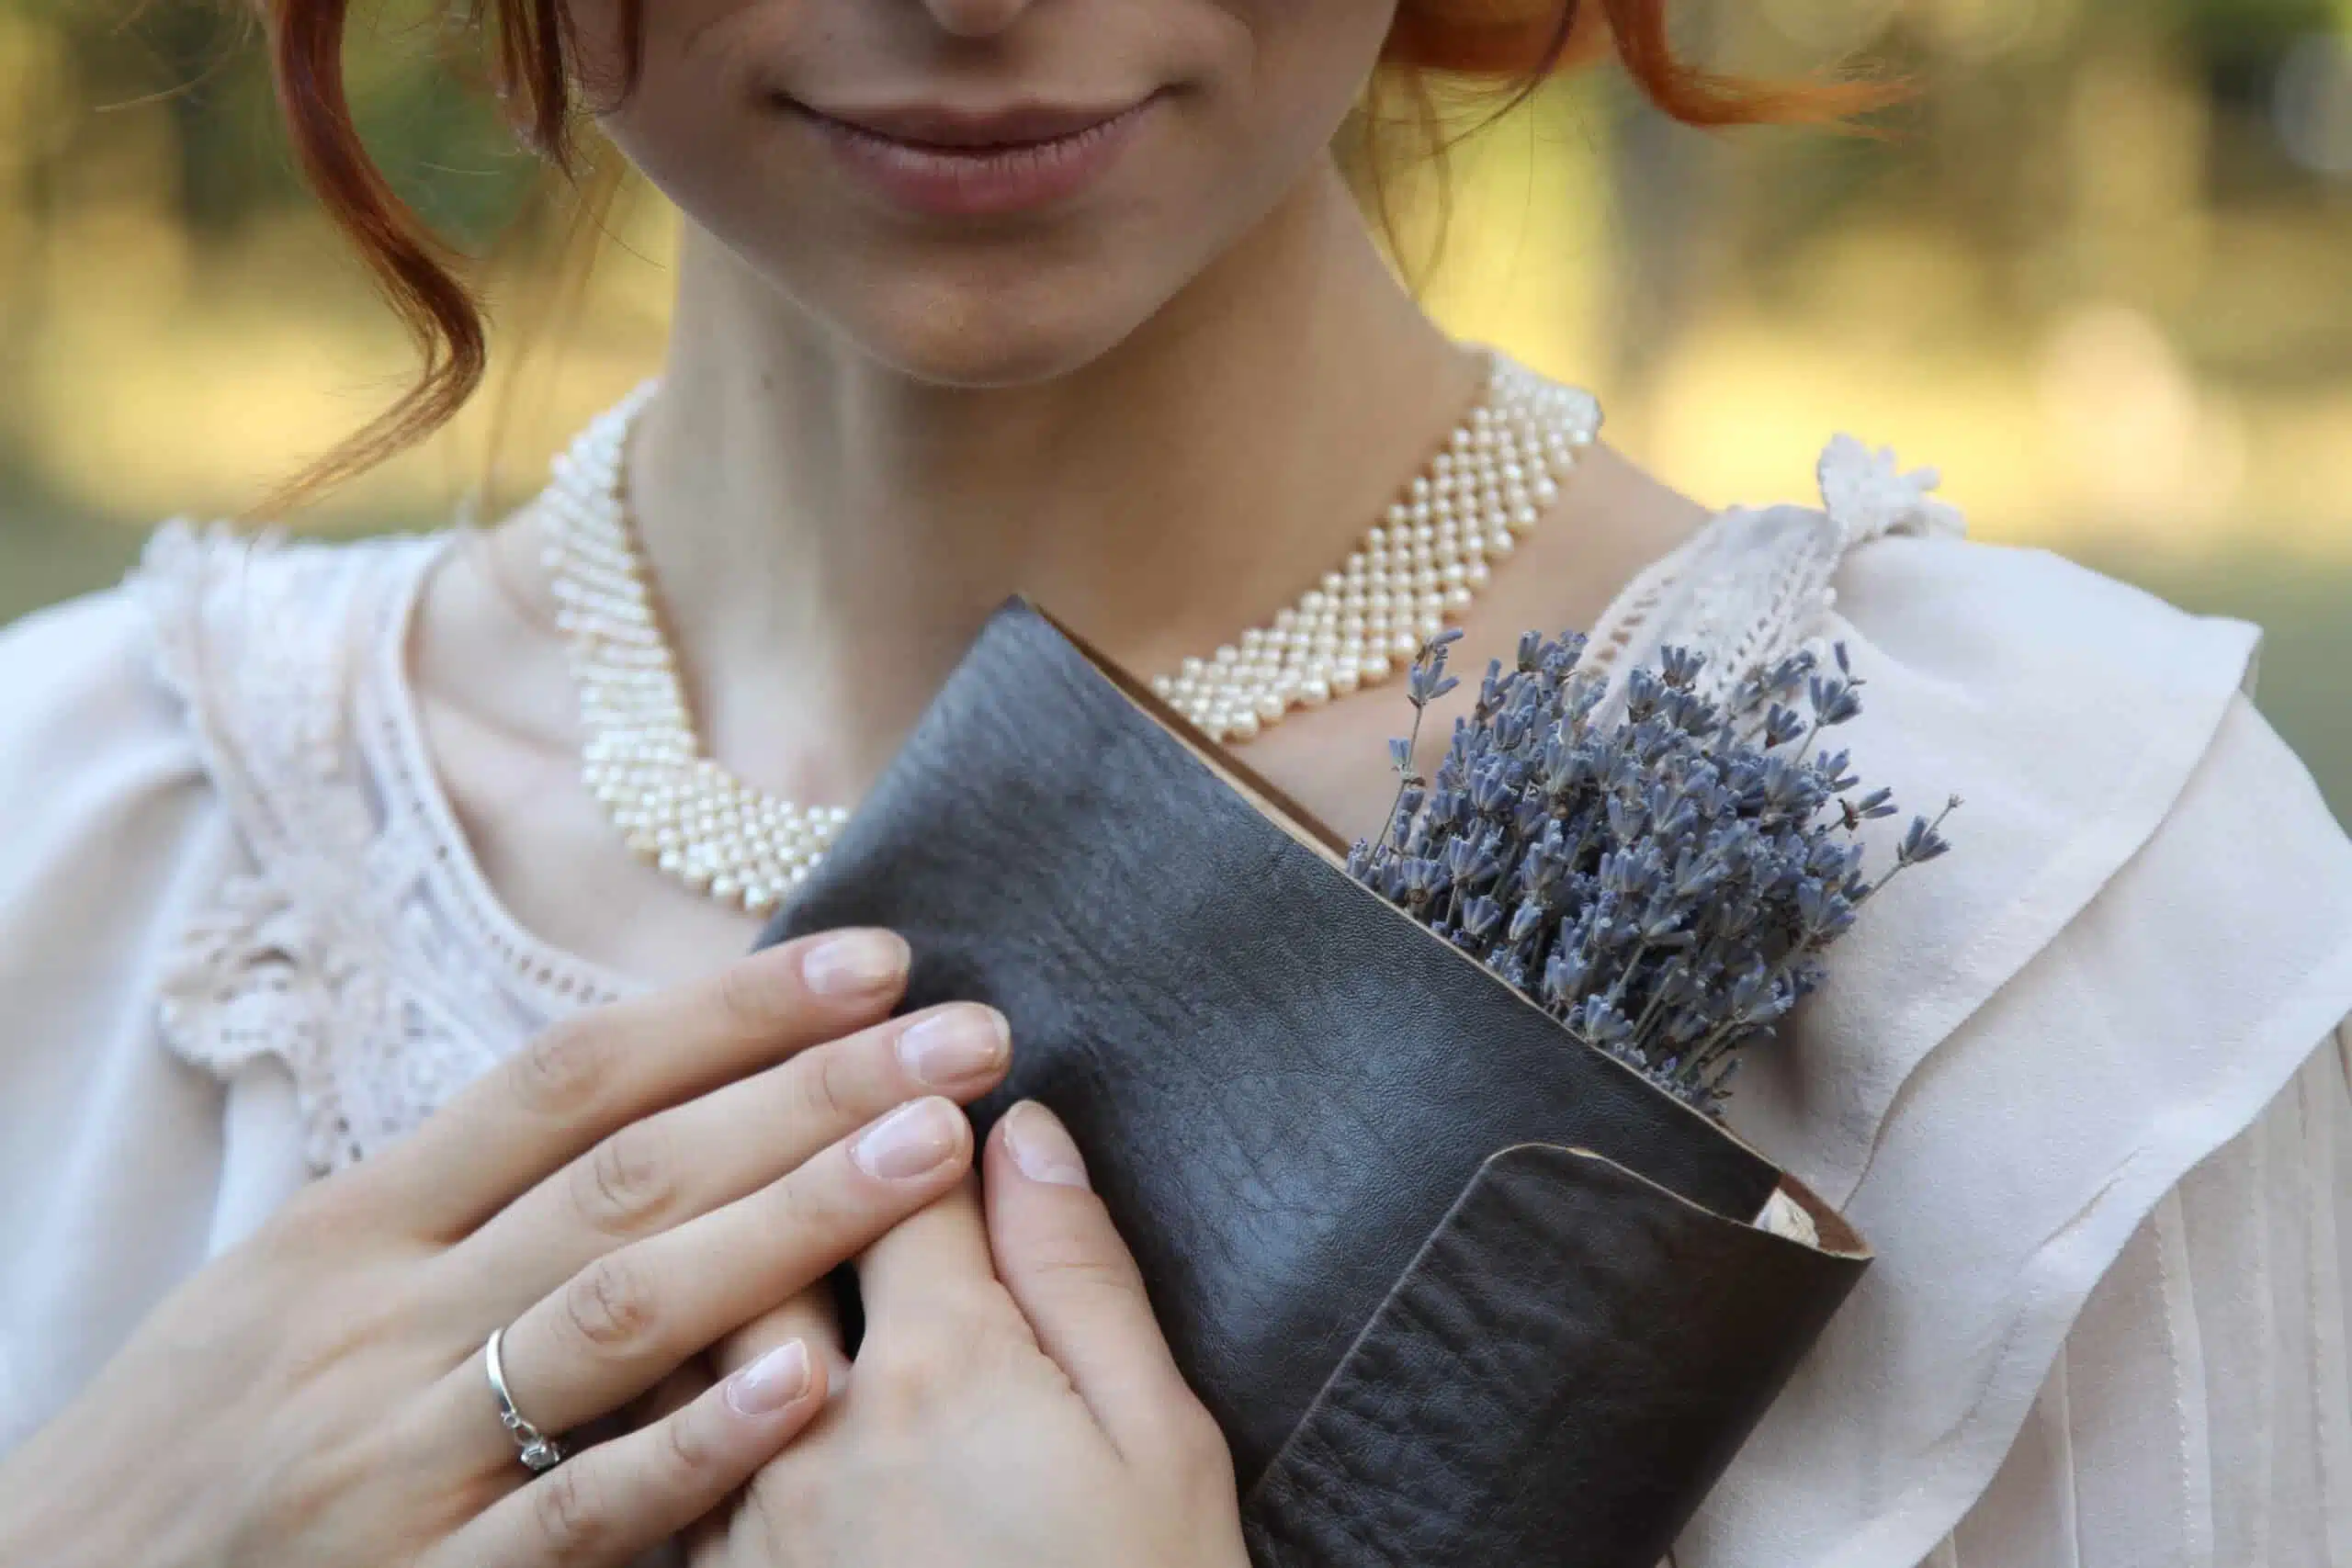 Beautiful redhead in a vintage dress holding a book with lavender flowers.